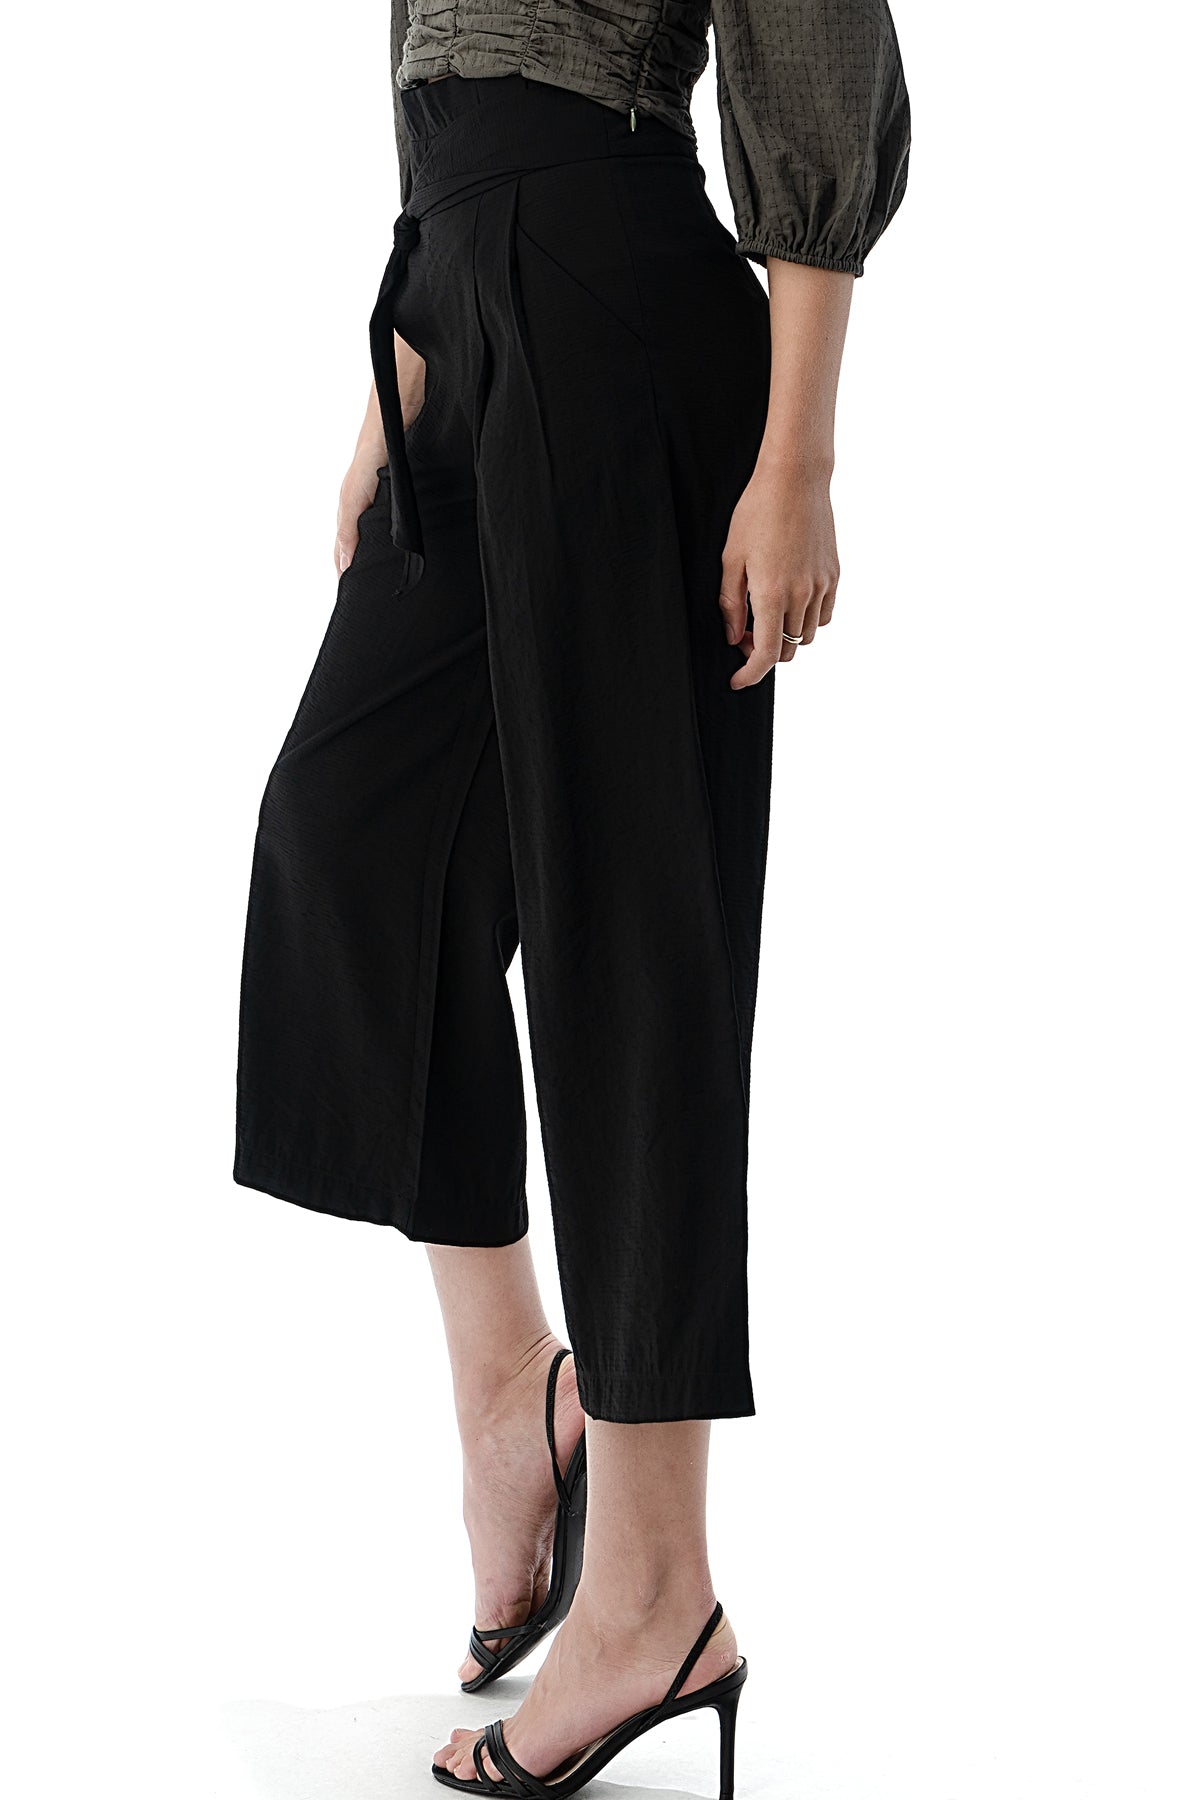 EDGY Land Girl's and Women's Pleat Waist Self Tie Belt Slit Pocket CroPPEd Pants